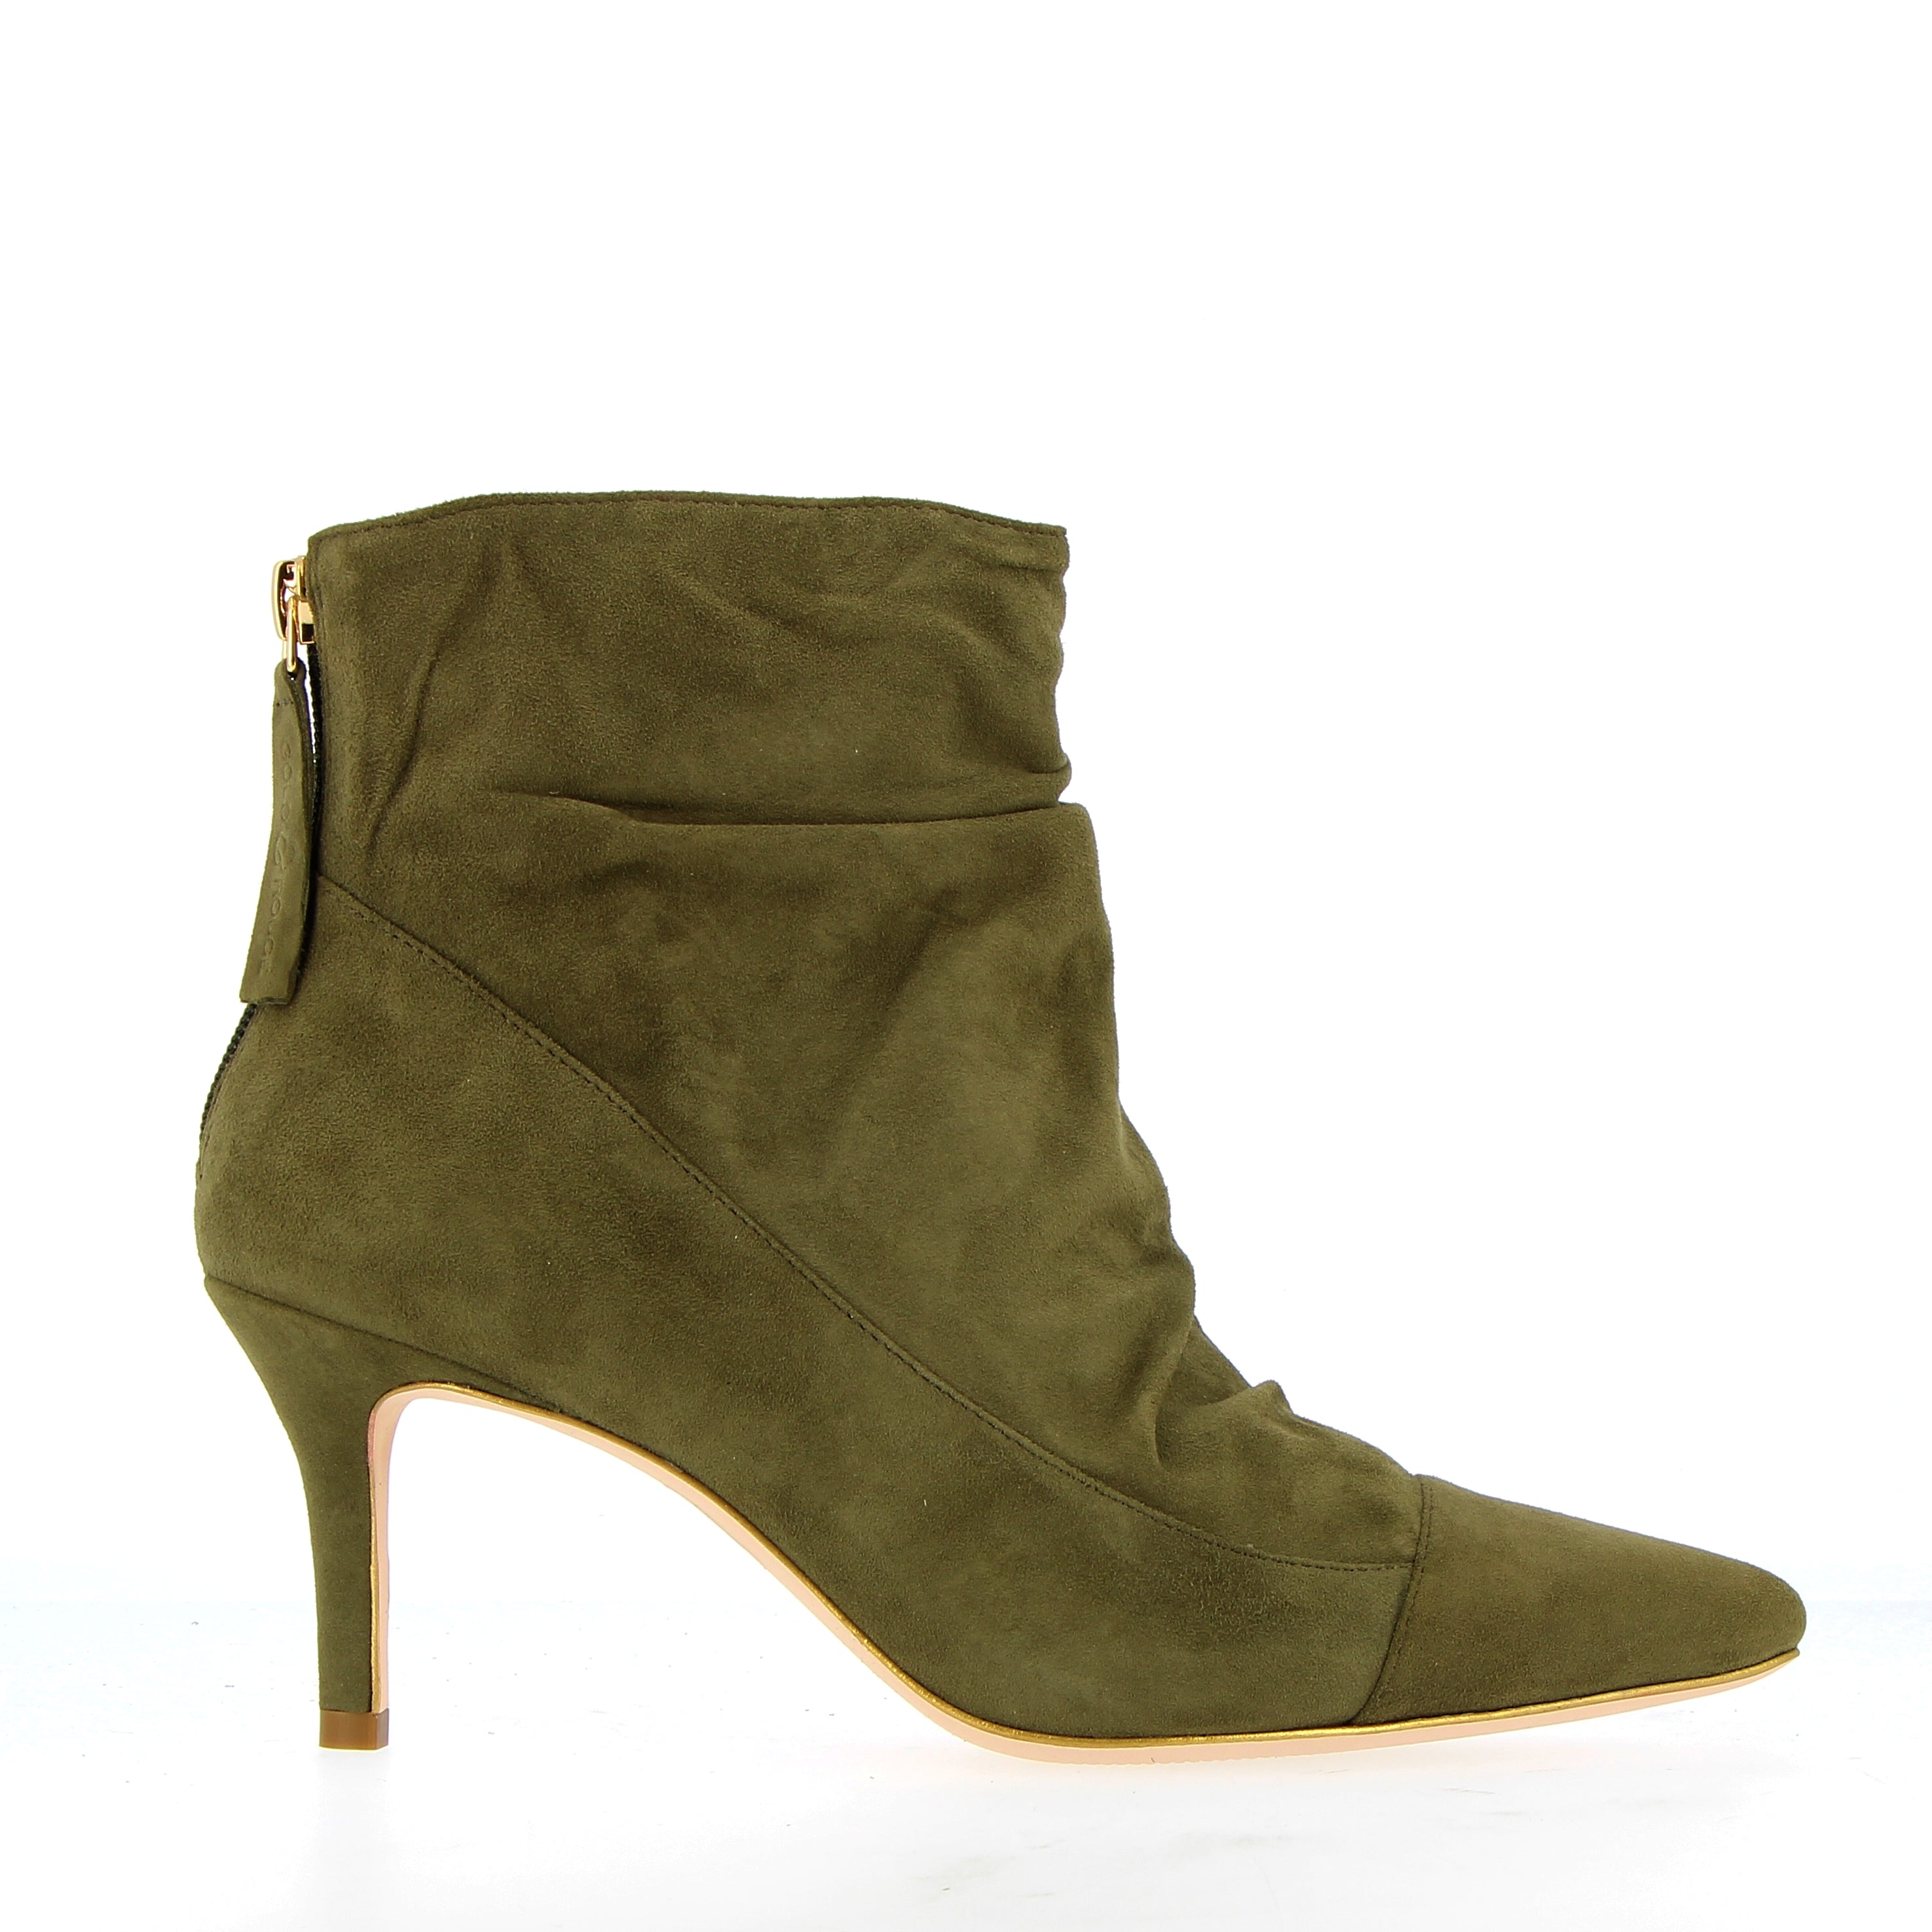 Ankle boot in soft forest suede with rear zip